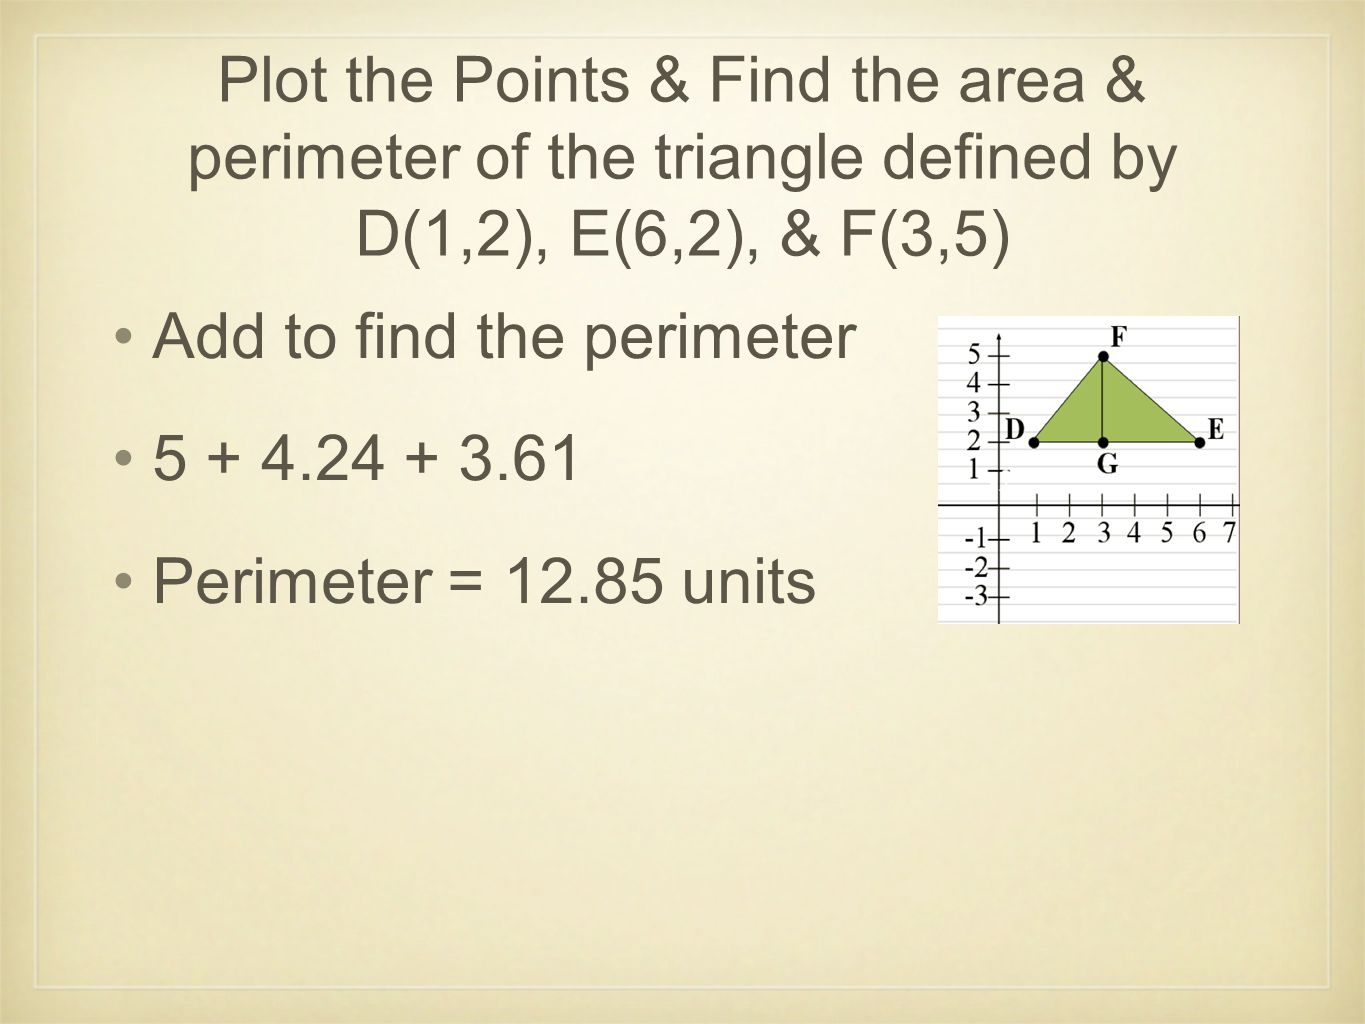 Plot the Points & Find the area & perimeter of the triangle defined by D(1,2), E(6,2), & F(3,5)